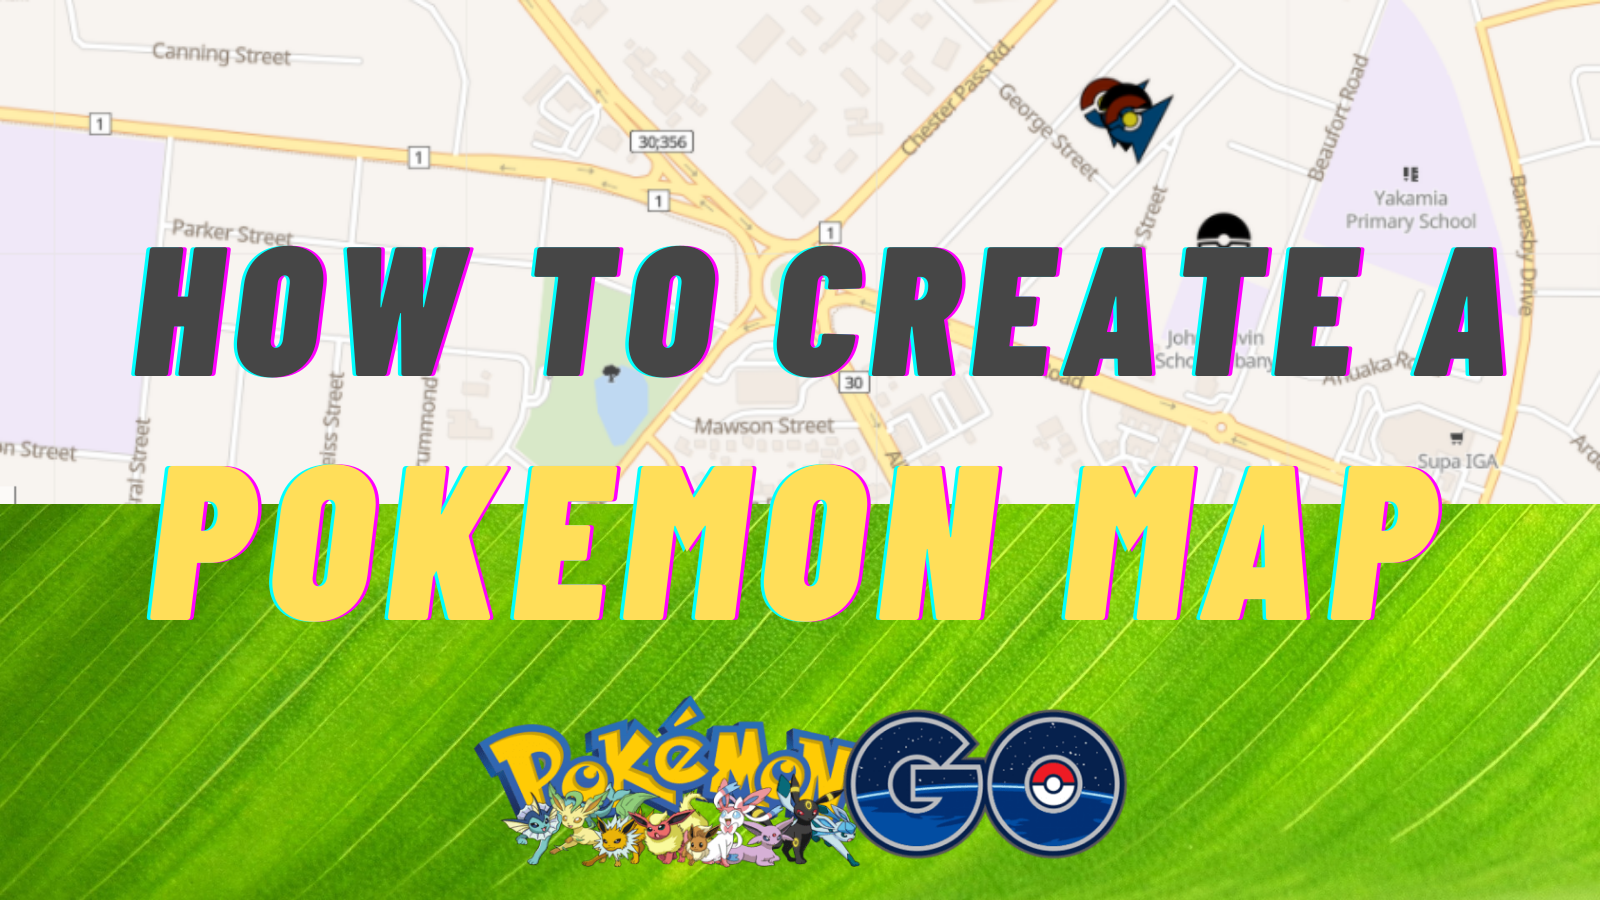 Password Protection: How to Create Pokémon GO accout